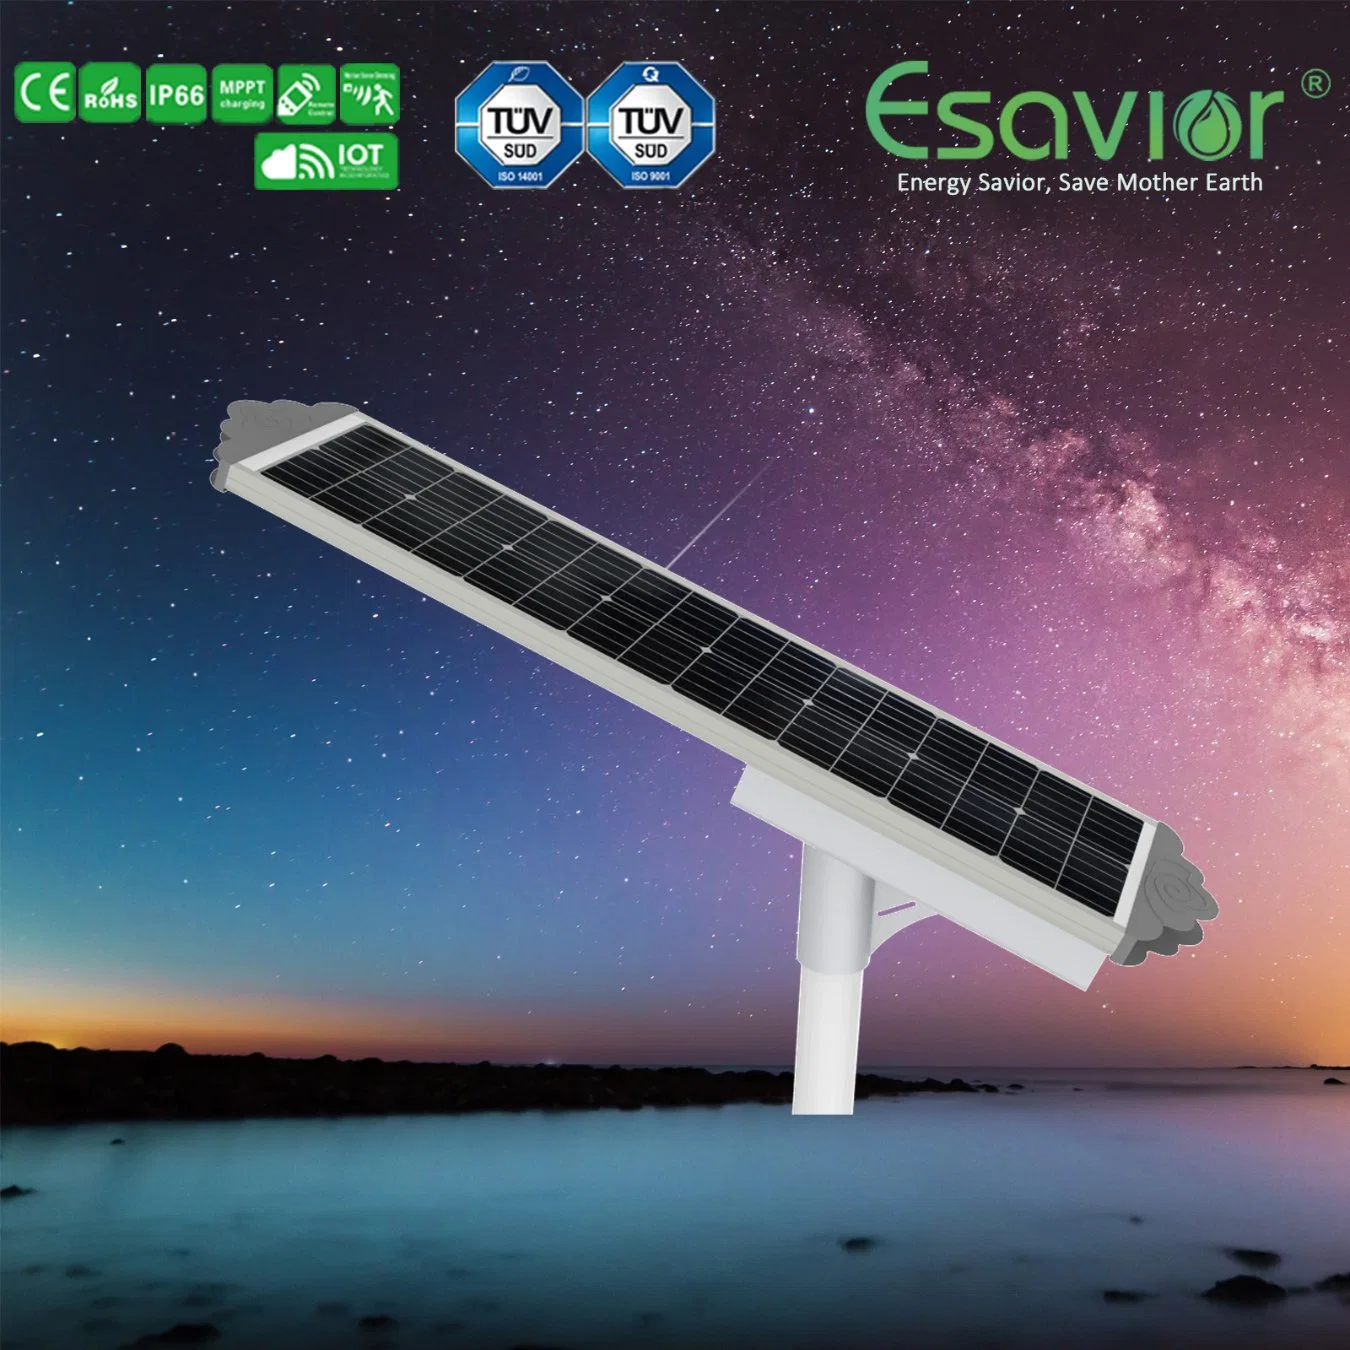 5000lm IP66 Waterproof 50W Integrated Solar Street Lighting Motion Sensor Iot Remote Control All in One Manufacturer Ce RoHS TUV IP66